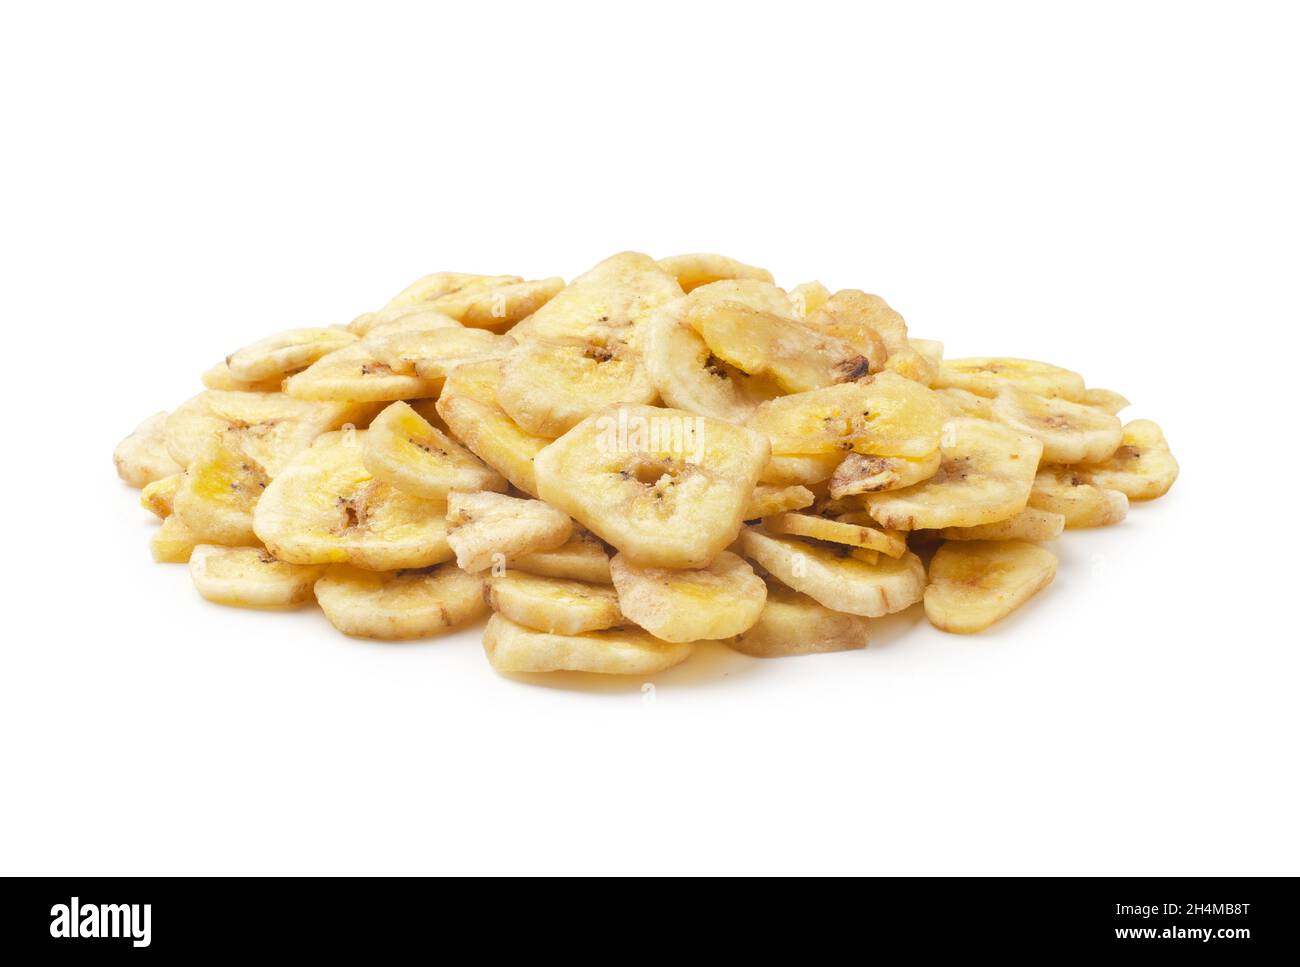 Homemade banana chips or dried and fried banana slices isolated on white background Stock Photo